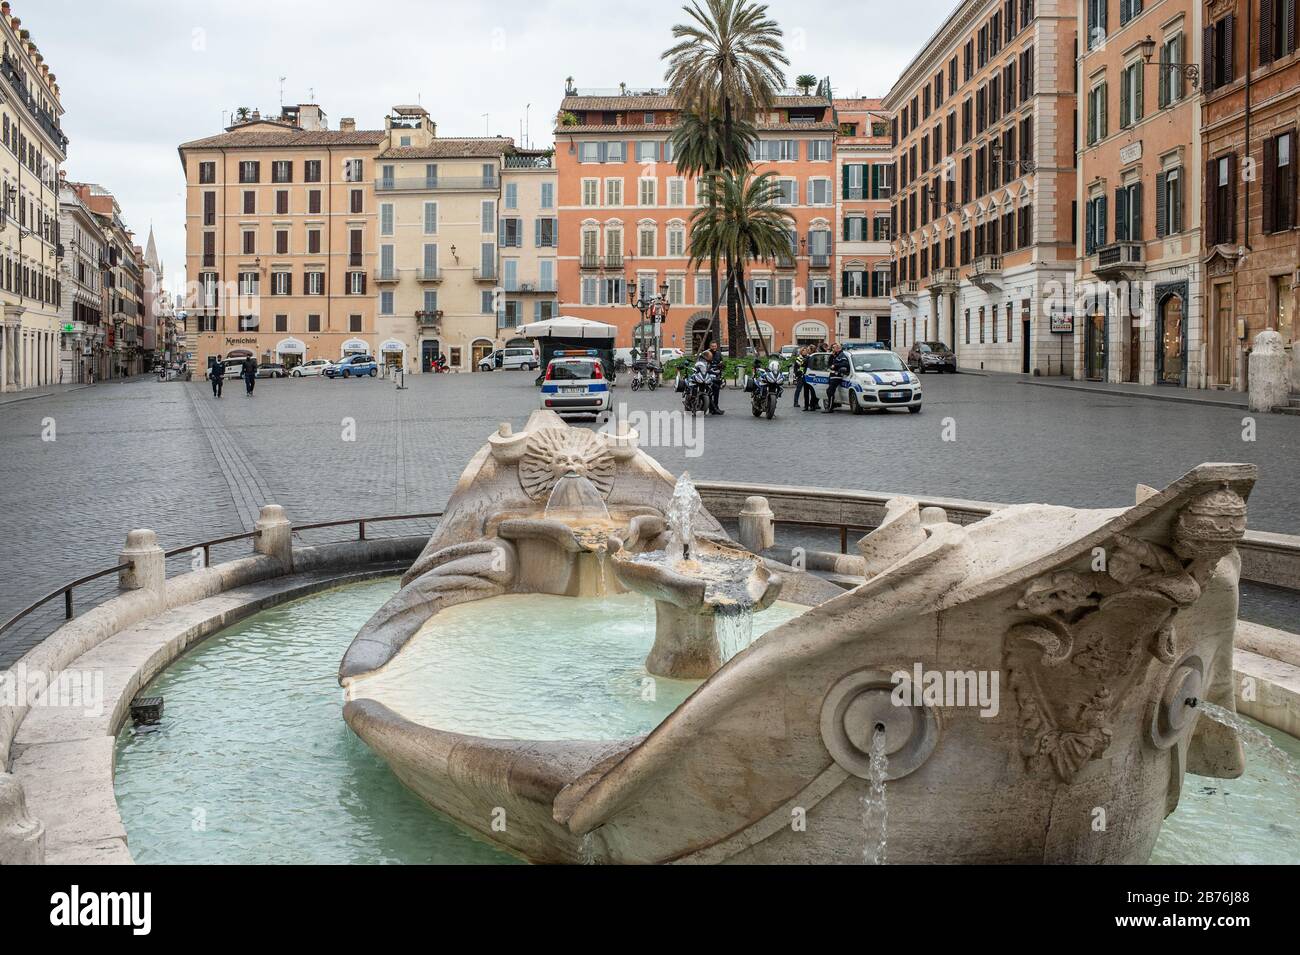 Piazza di Spagna, in Rome, deserted and patrolled by the police for the Coronavirus epidemic that hit Italy. The Italian government, with a series of decrees, has limited the possibility of movement of people to prevent further infections to the bare minimum. Stock Photo